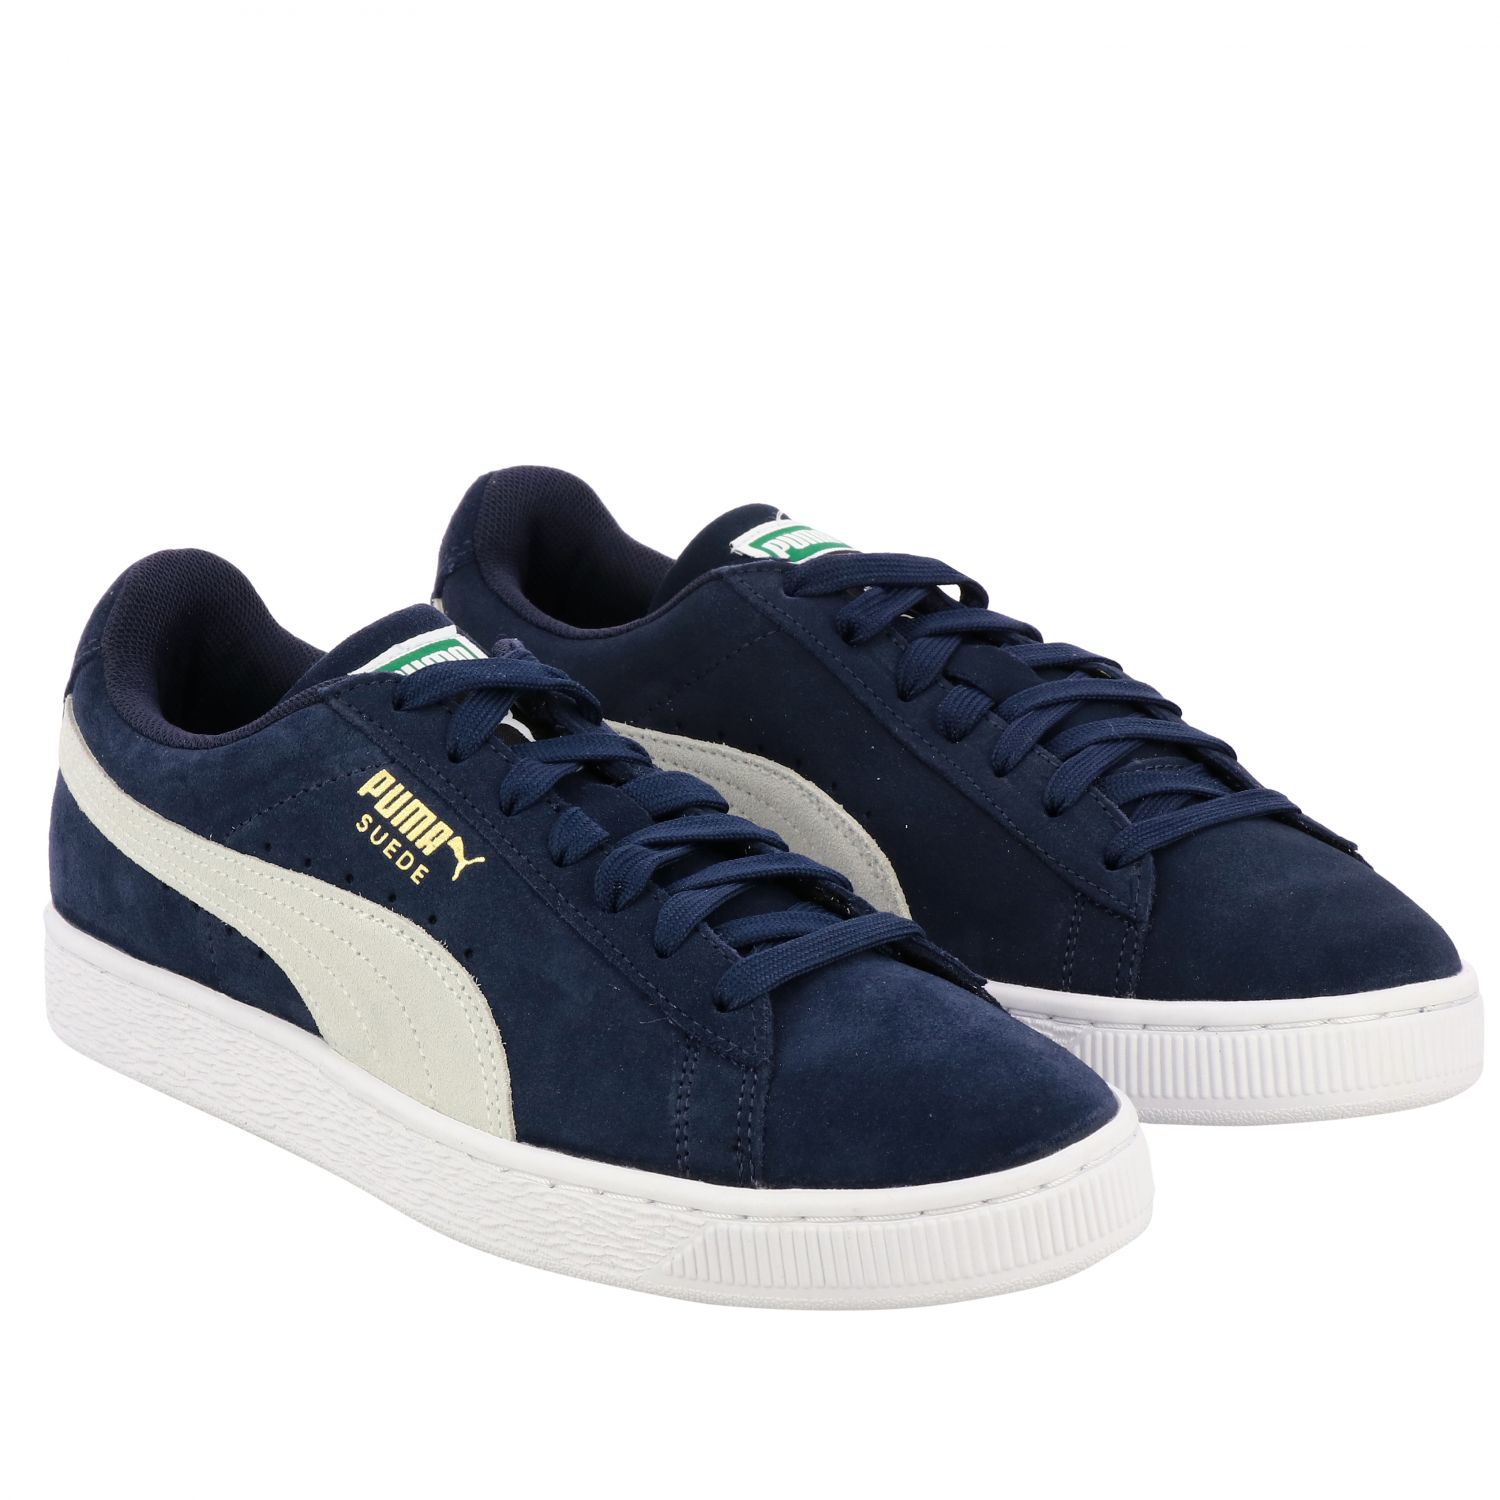 Puma Outlet: trainers for men - Blue | Puma trainers 356568 online on ...